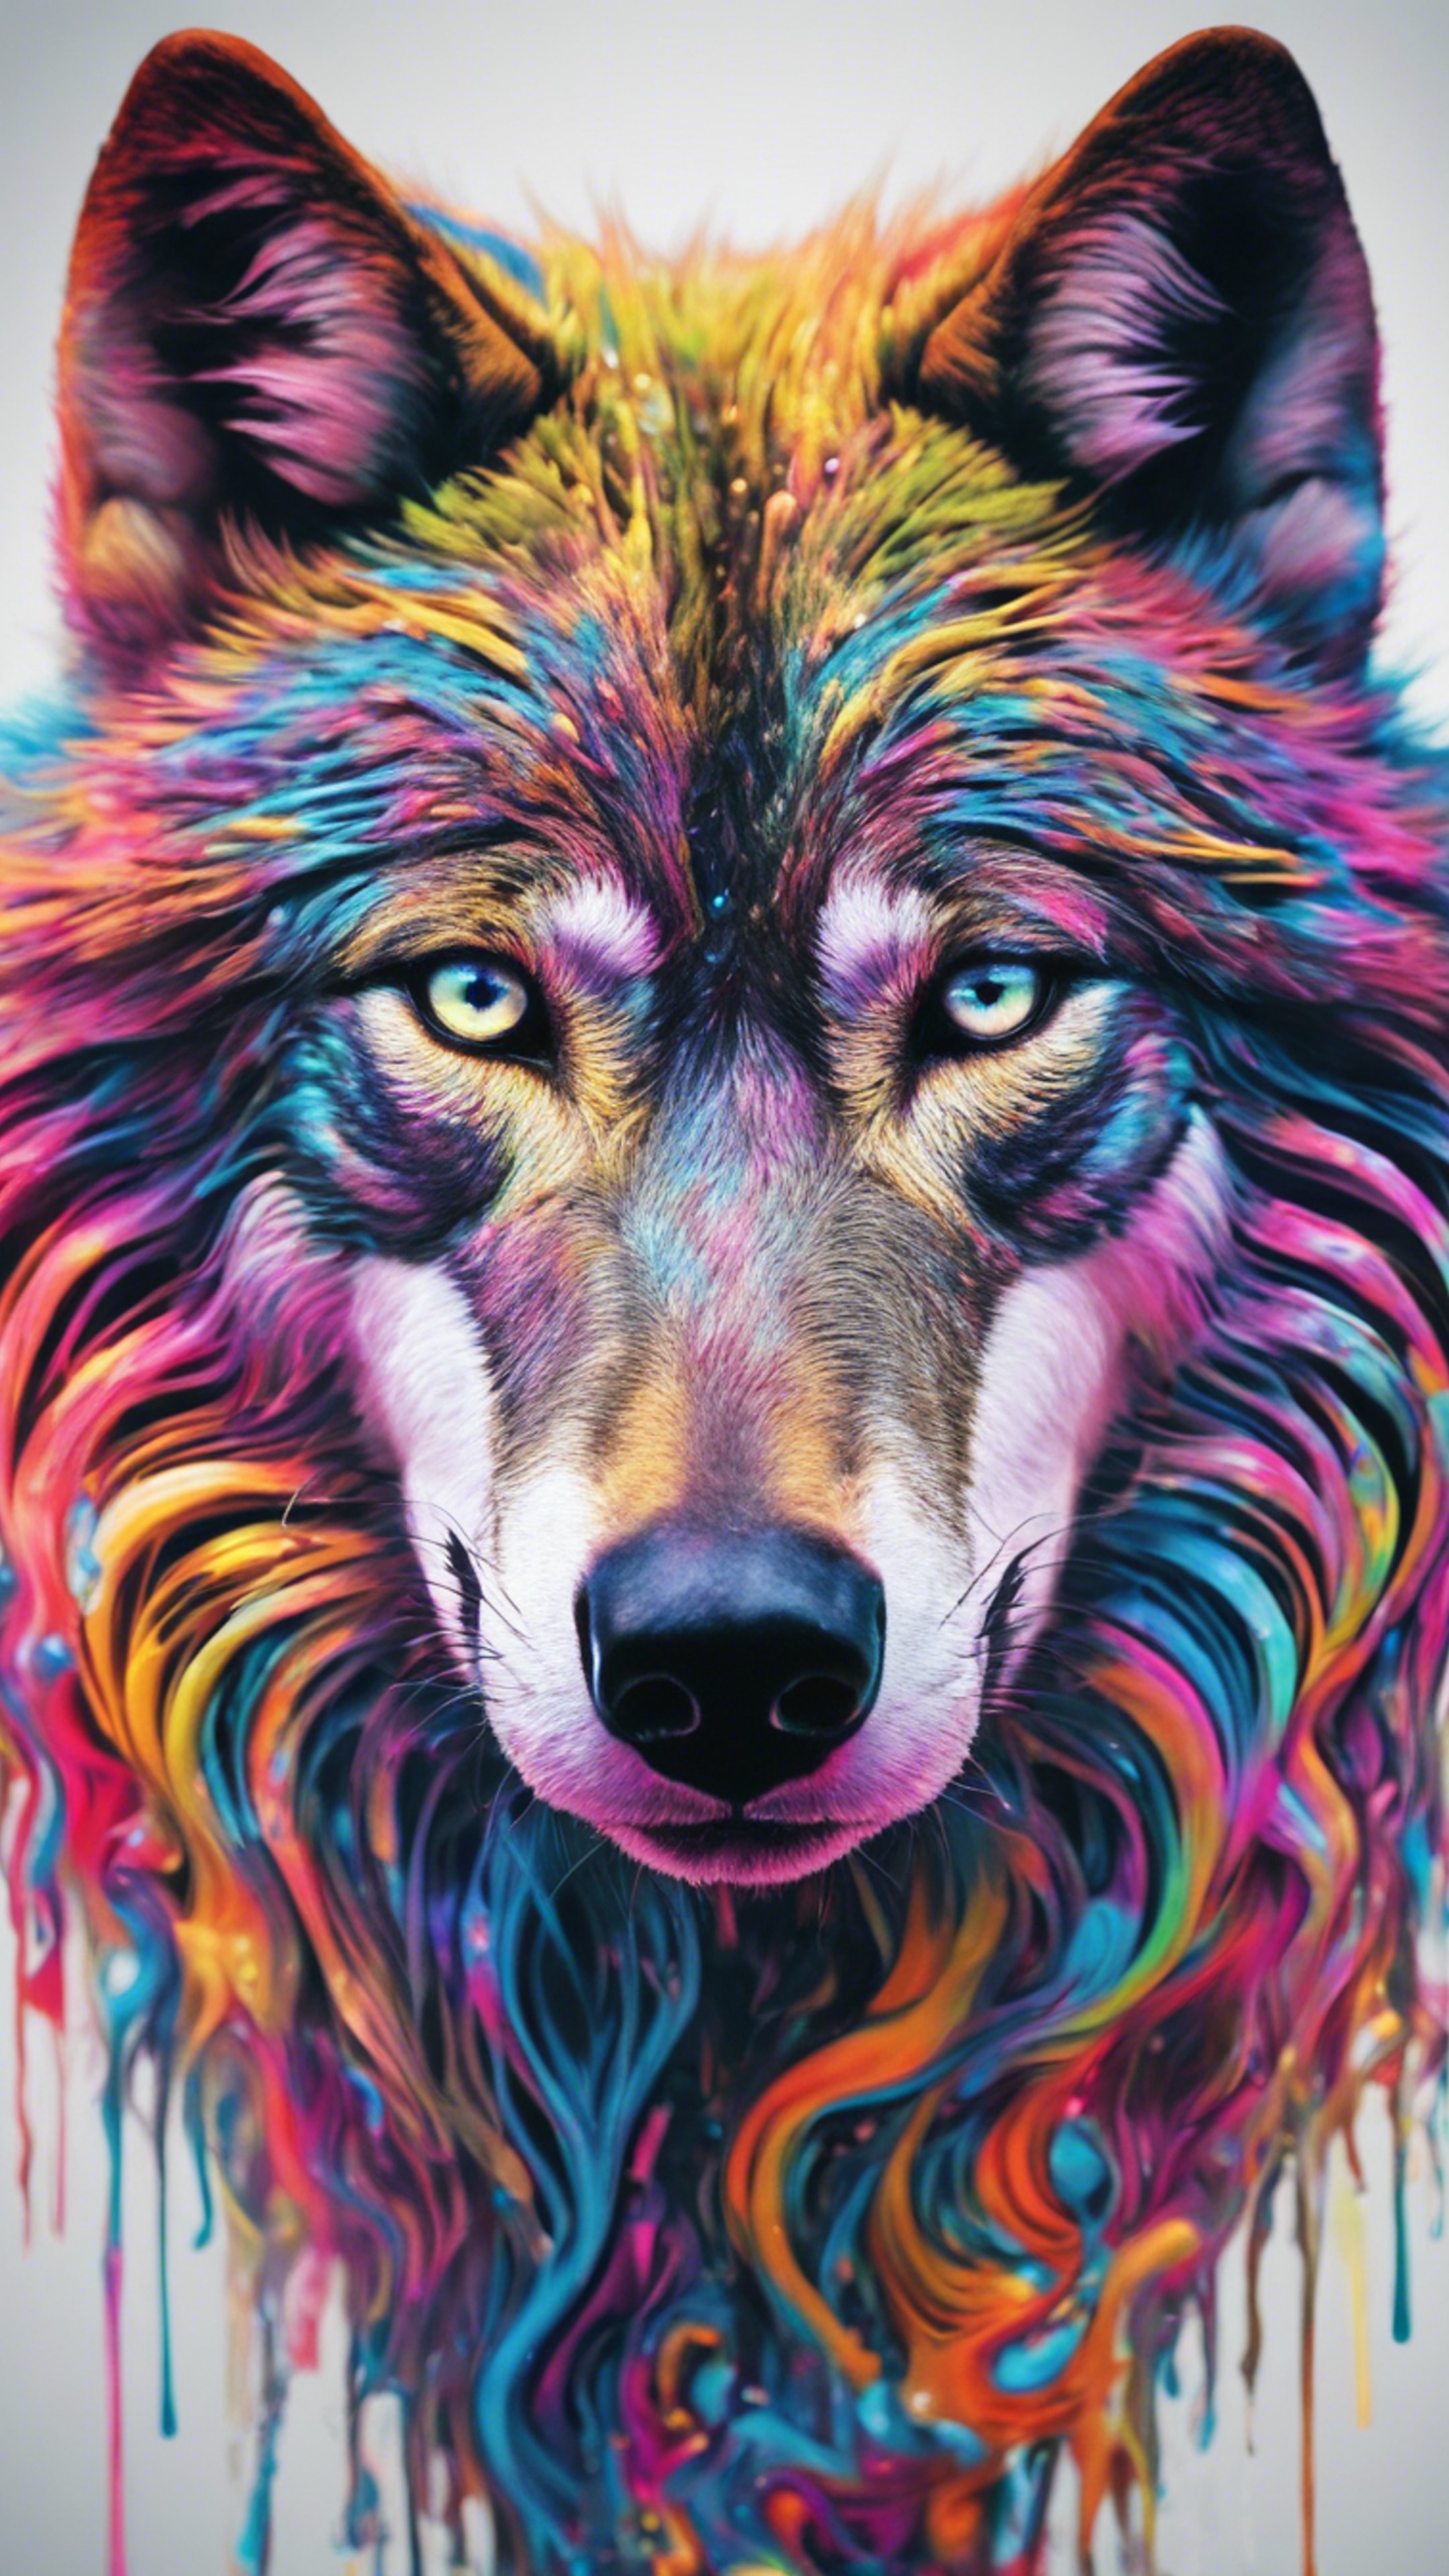 A psychedelic wolf camouflaged within a vibrant, multi-spectral swirl of colors, eyes glowing with hypnotic intensity.壁紙[2388b6e4895d4937991f]